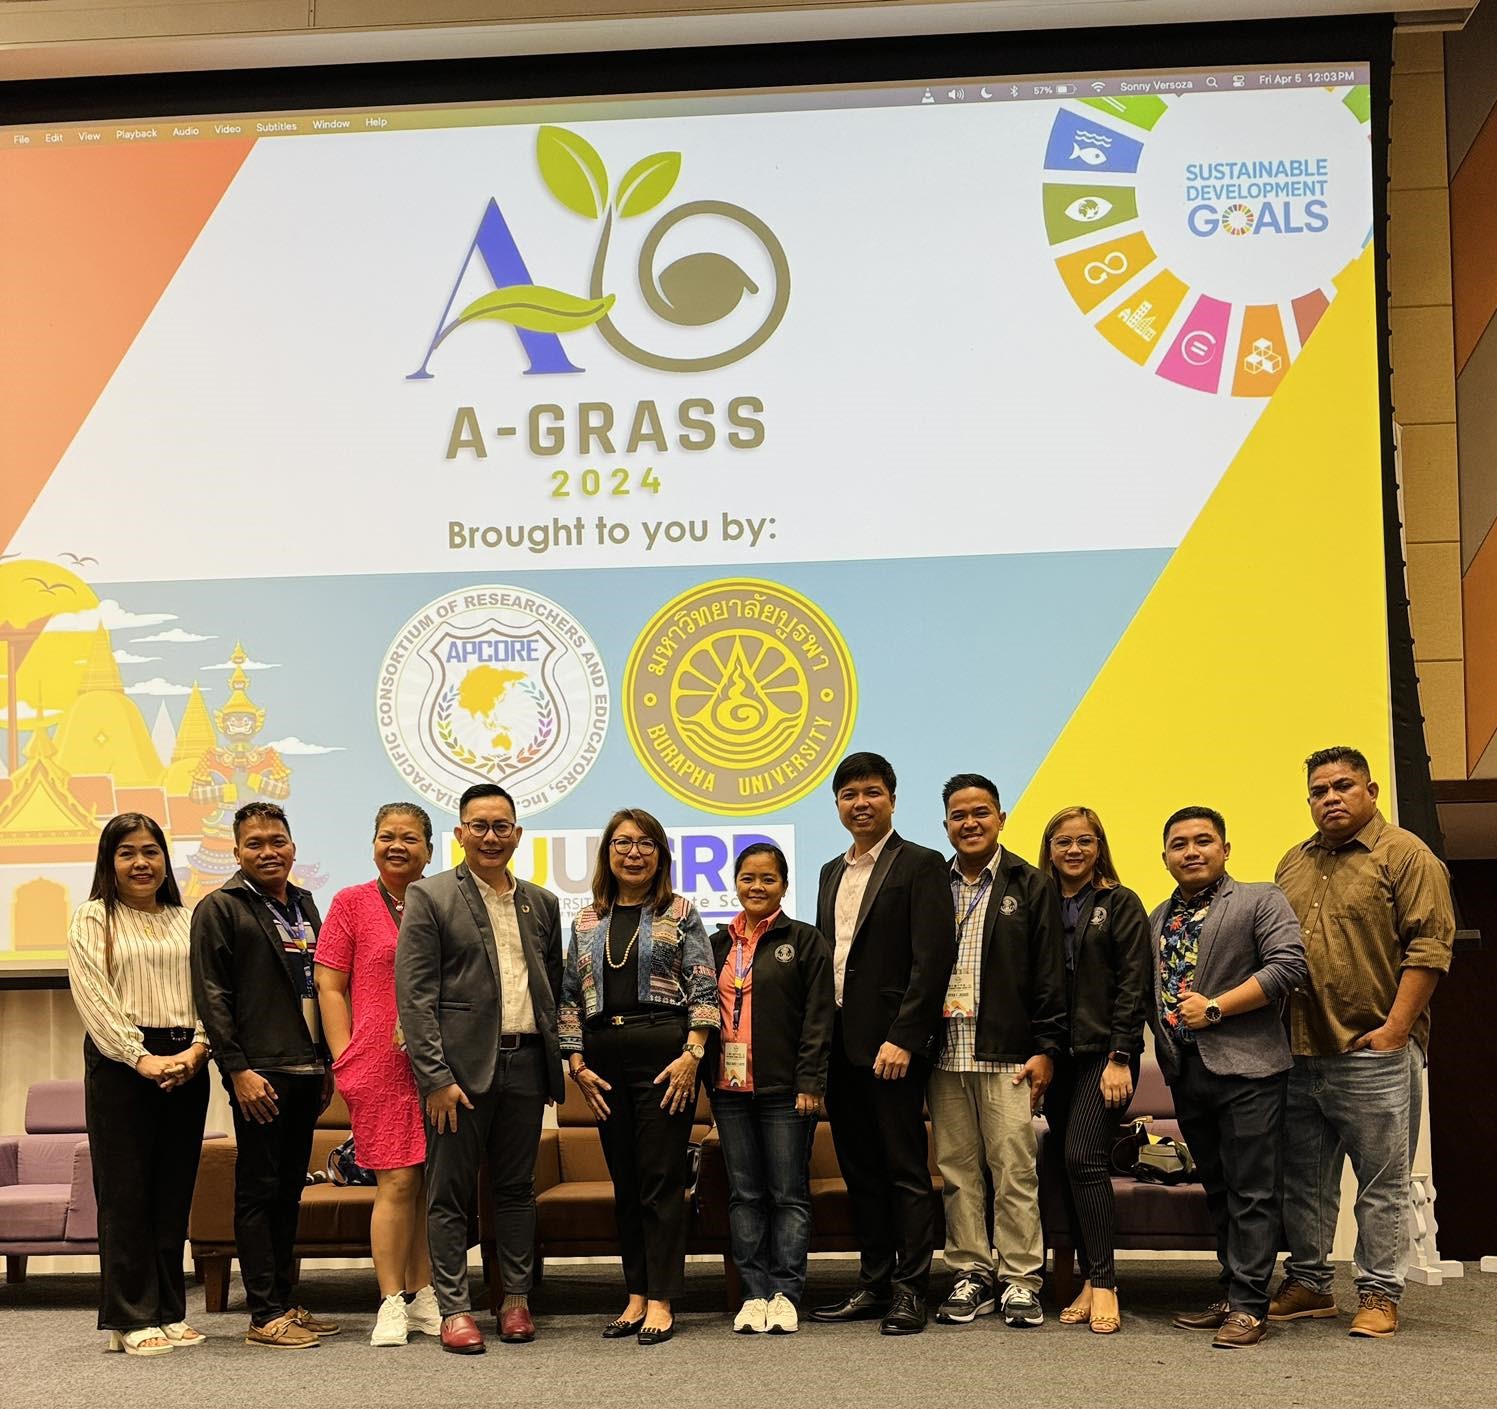 QCU Leaves a Mark at AGraSS 2024, Championing Sustainable Development